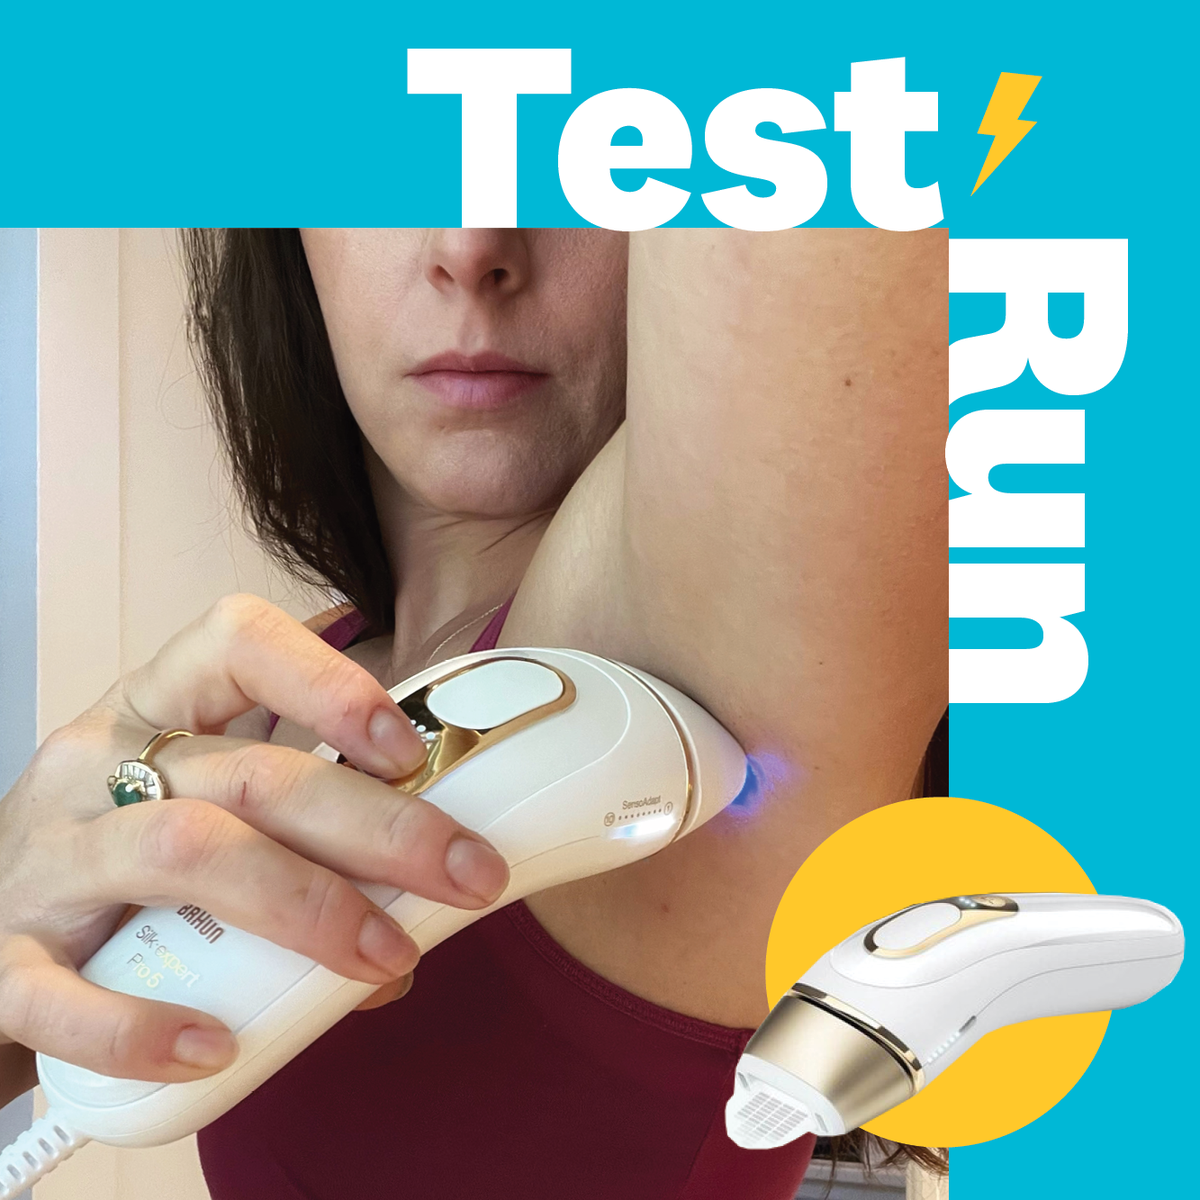 MY RESULTS - LASER HAIR REMOVAL AT HOME  IPL REVIEW Braun Silk Expert Pro  5 